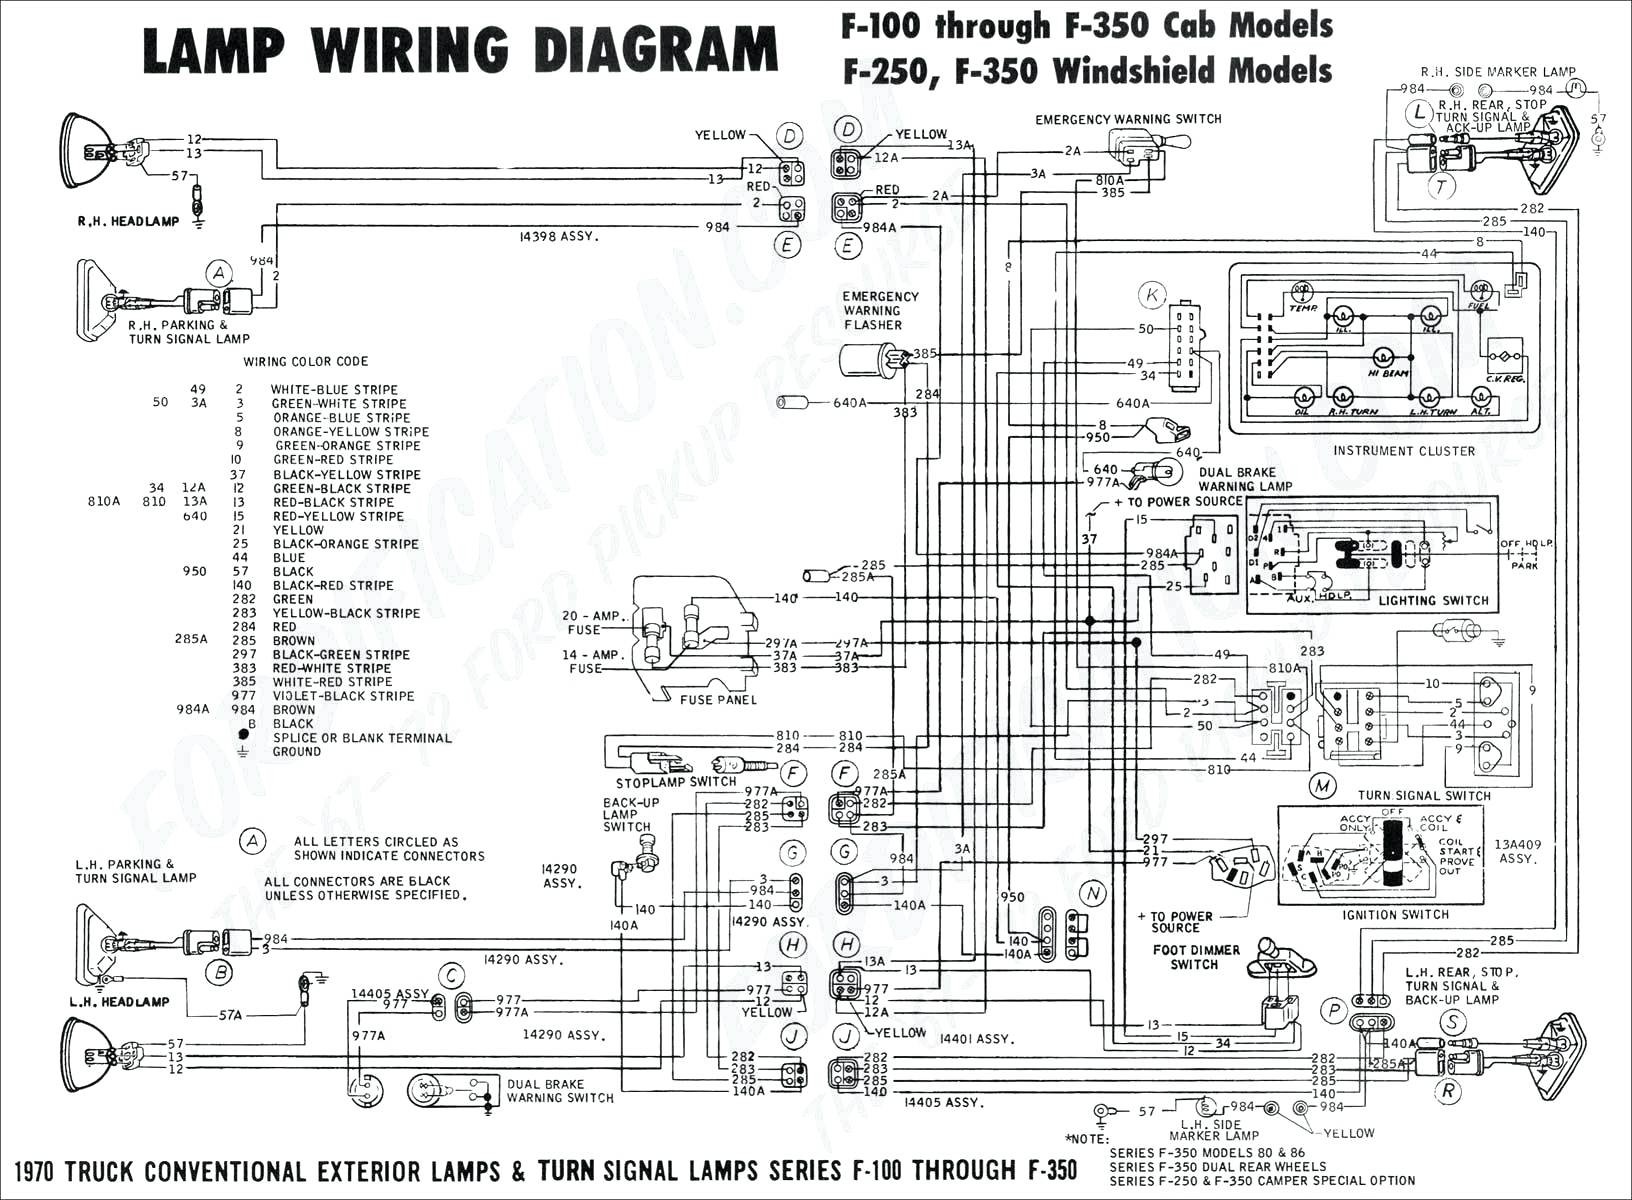 How to Wire A Transfer Switch for A Generator Diagram 5b6dc Case Wiring Diagram Of How to Wire A Transfer Switch for A Generator Diagram